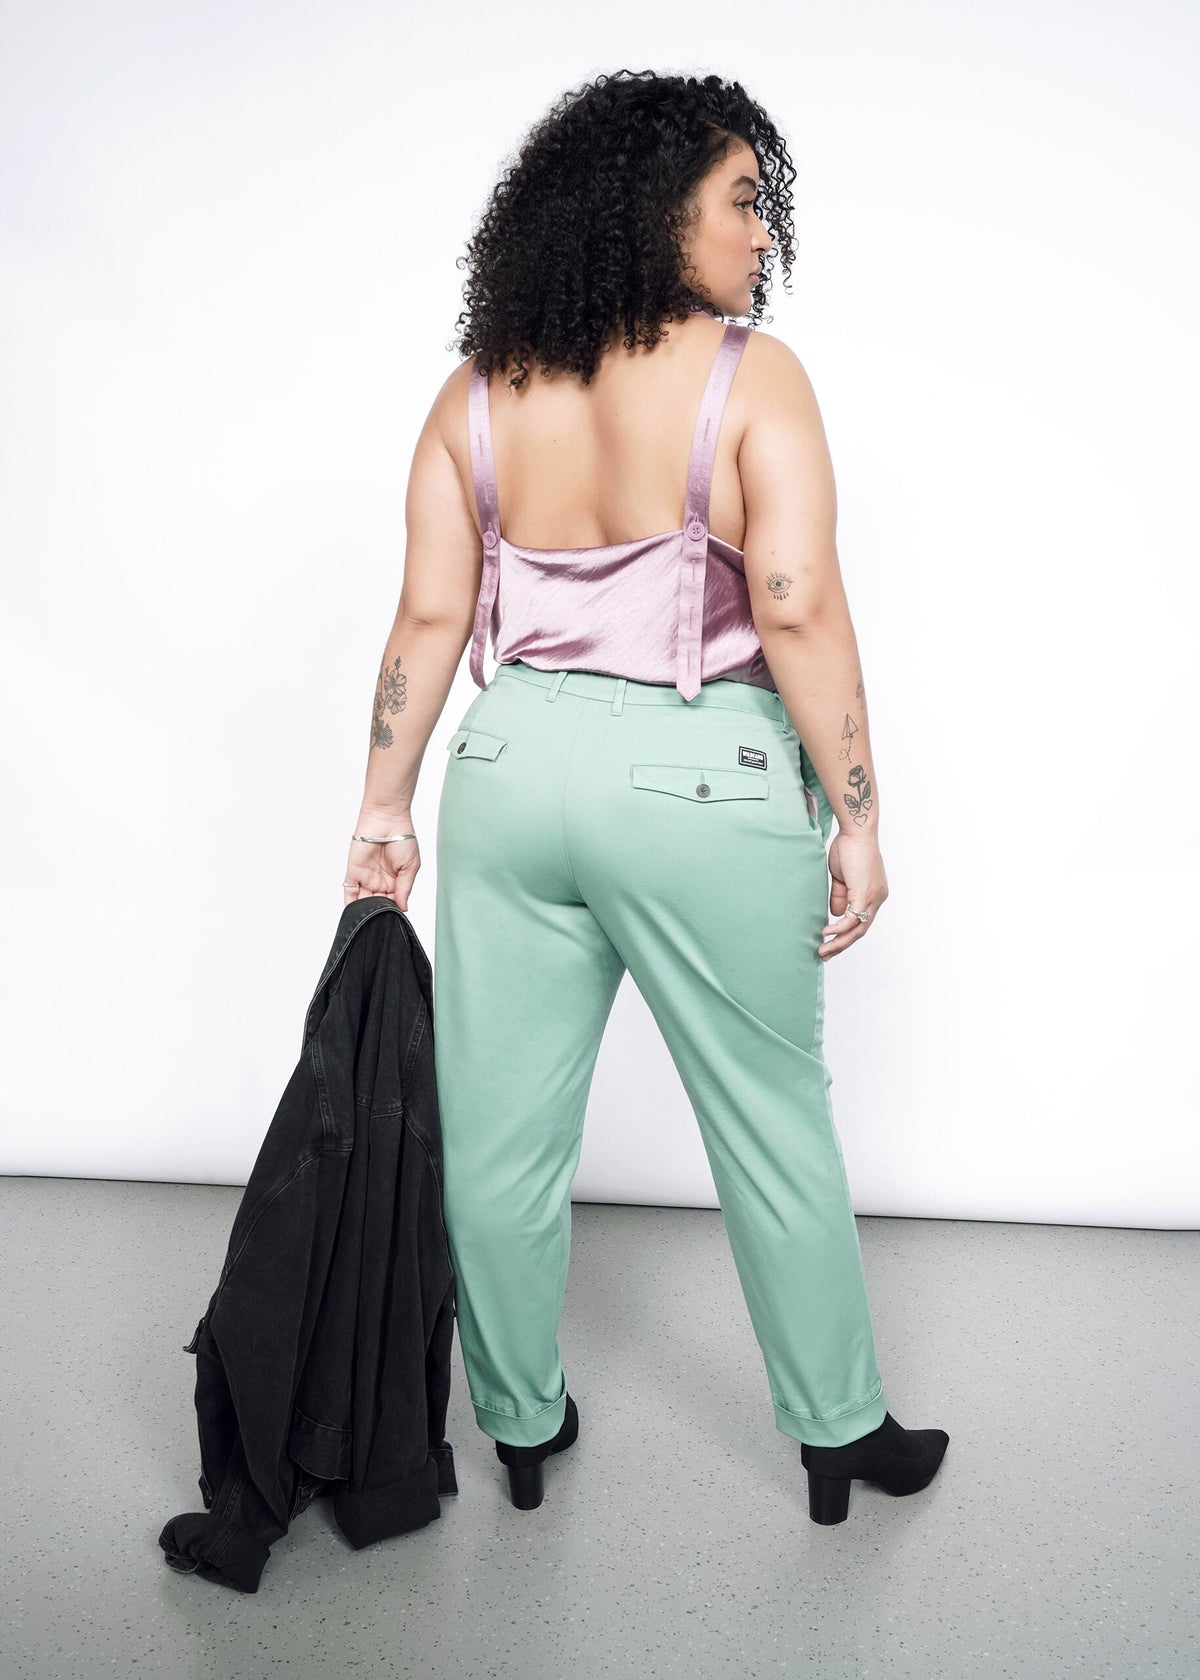 Back image of Model wearing the Essential Trouser in Sage in size 16, with the Empower Cami in Mauve, black heeled boots, and carrying a black jacket.